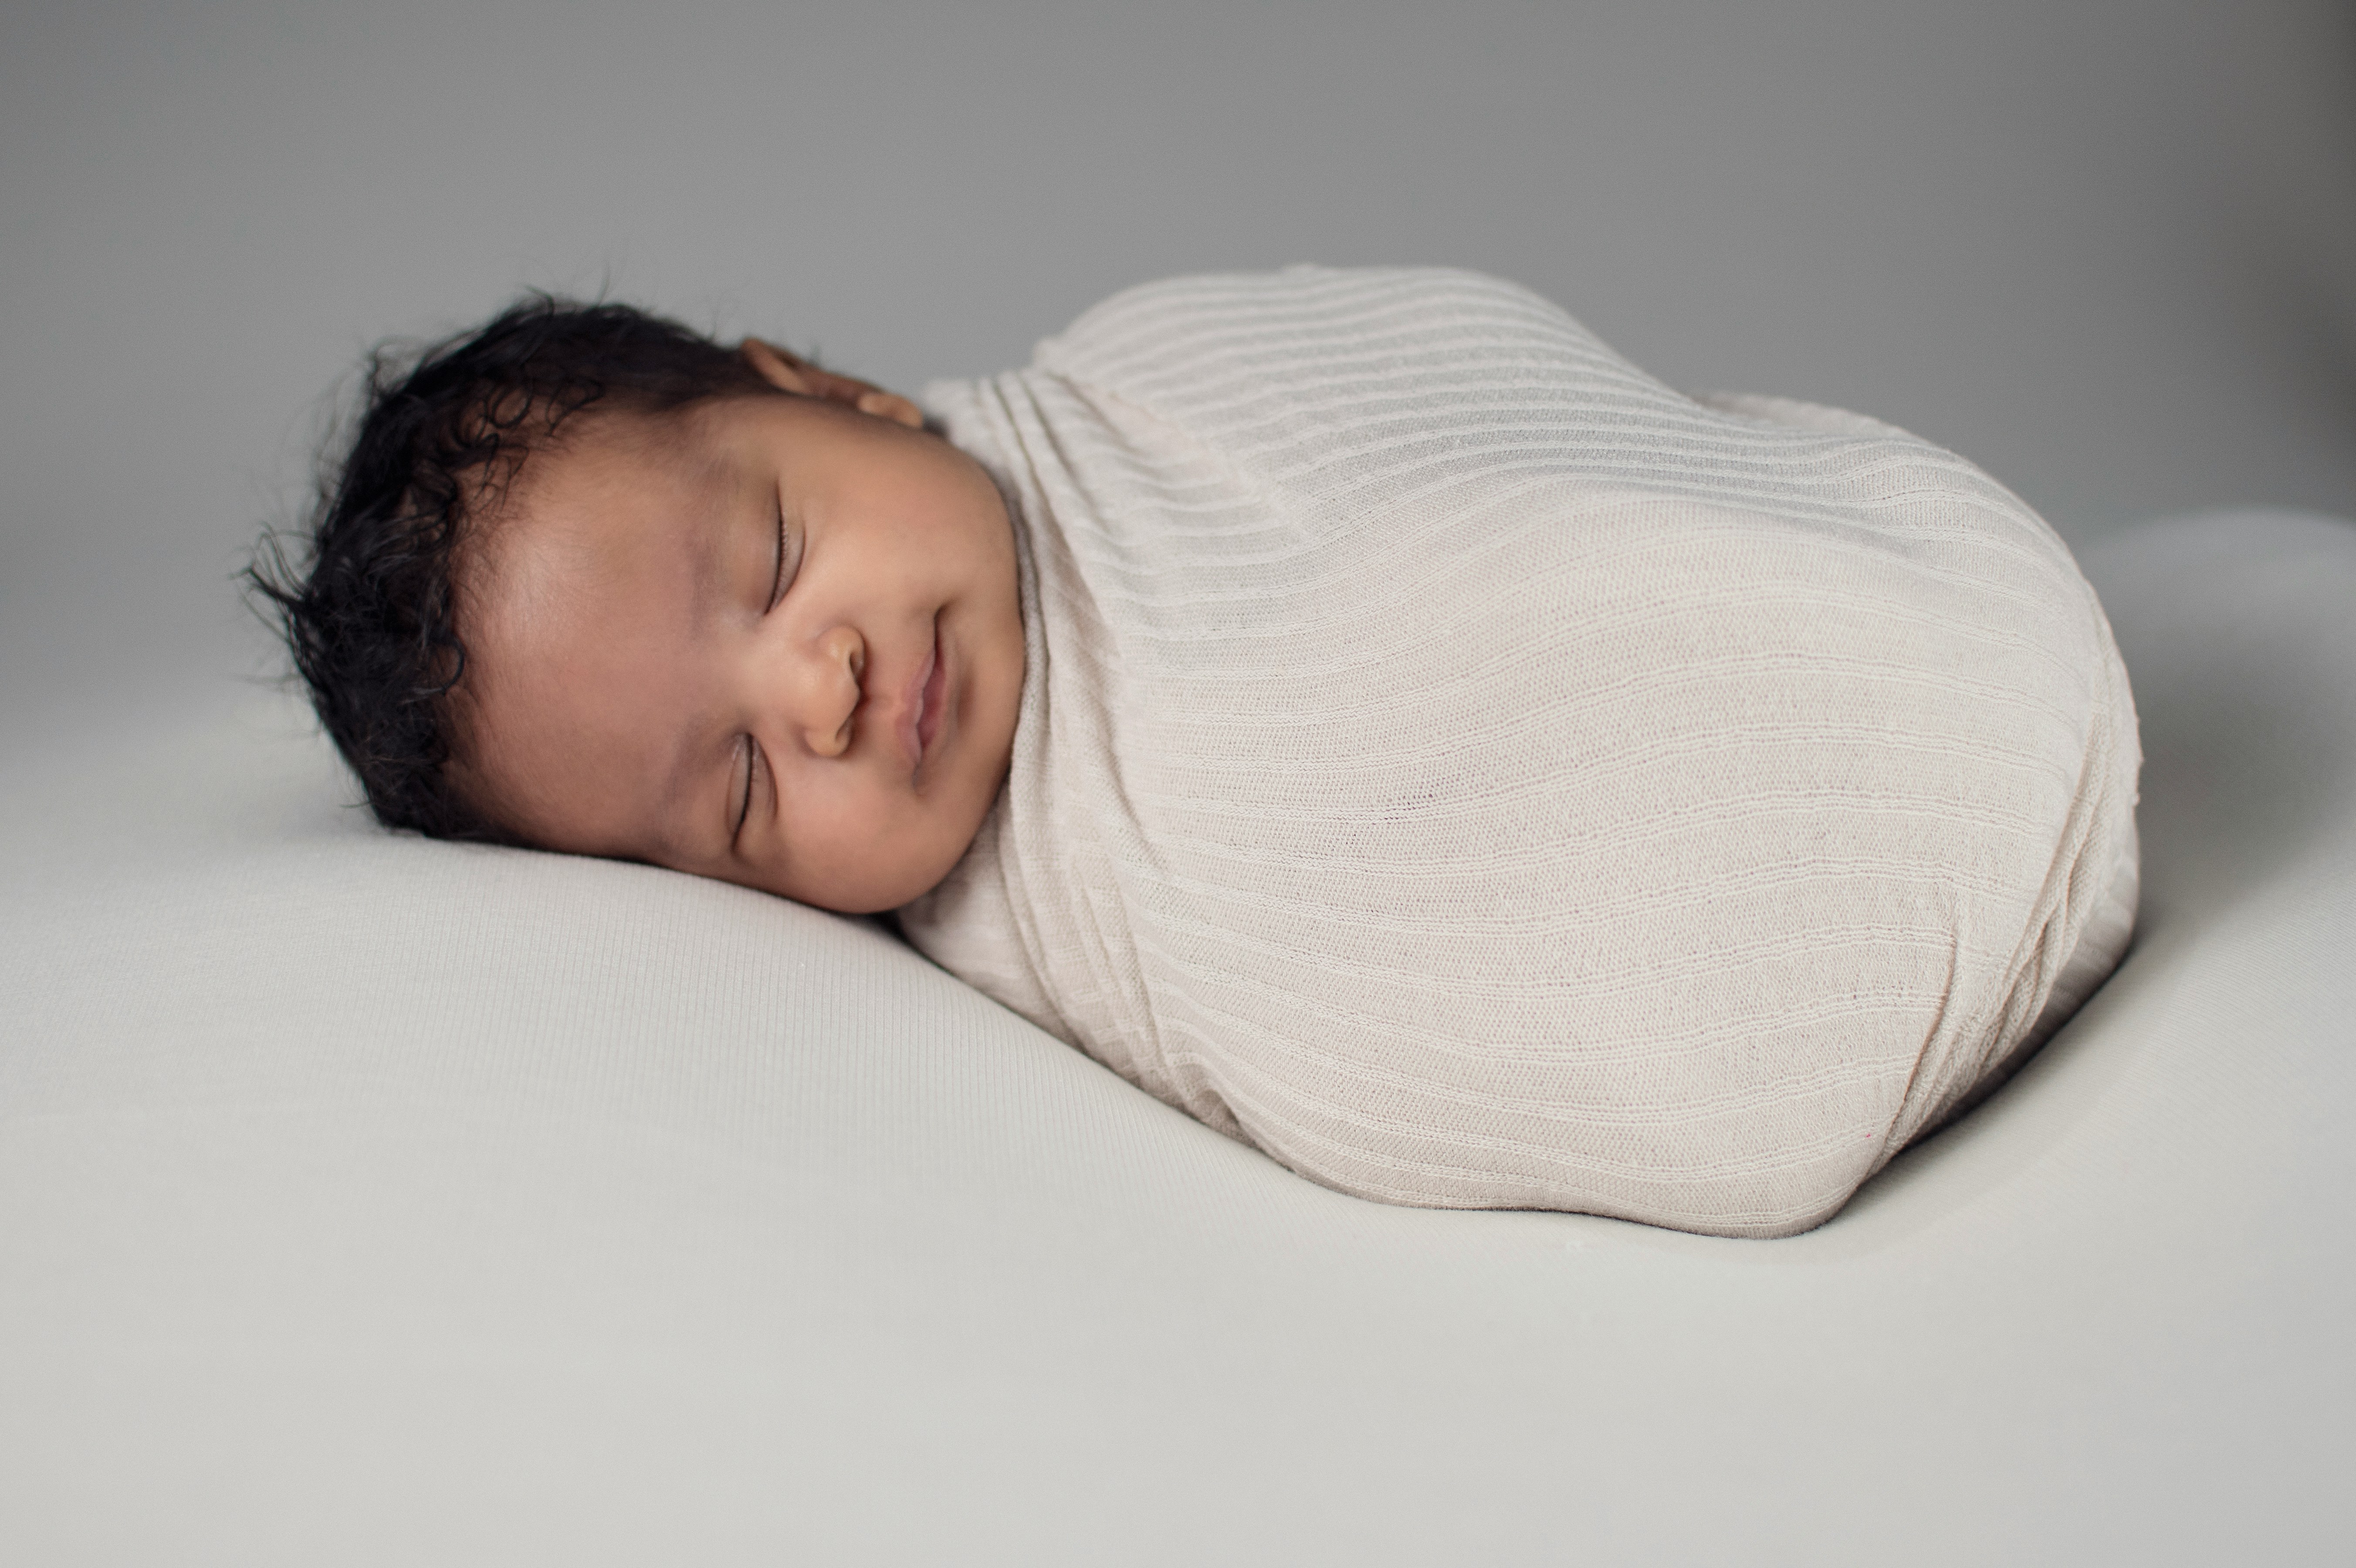 How to Dress Baby for Sleep Best Clothing Materials to Use